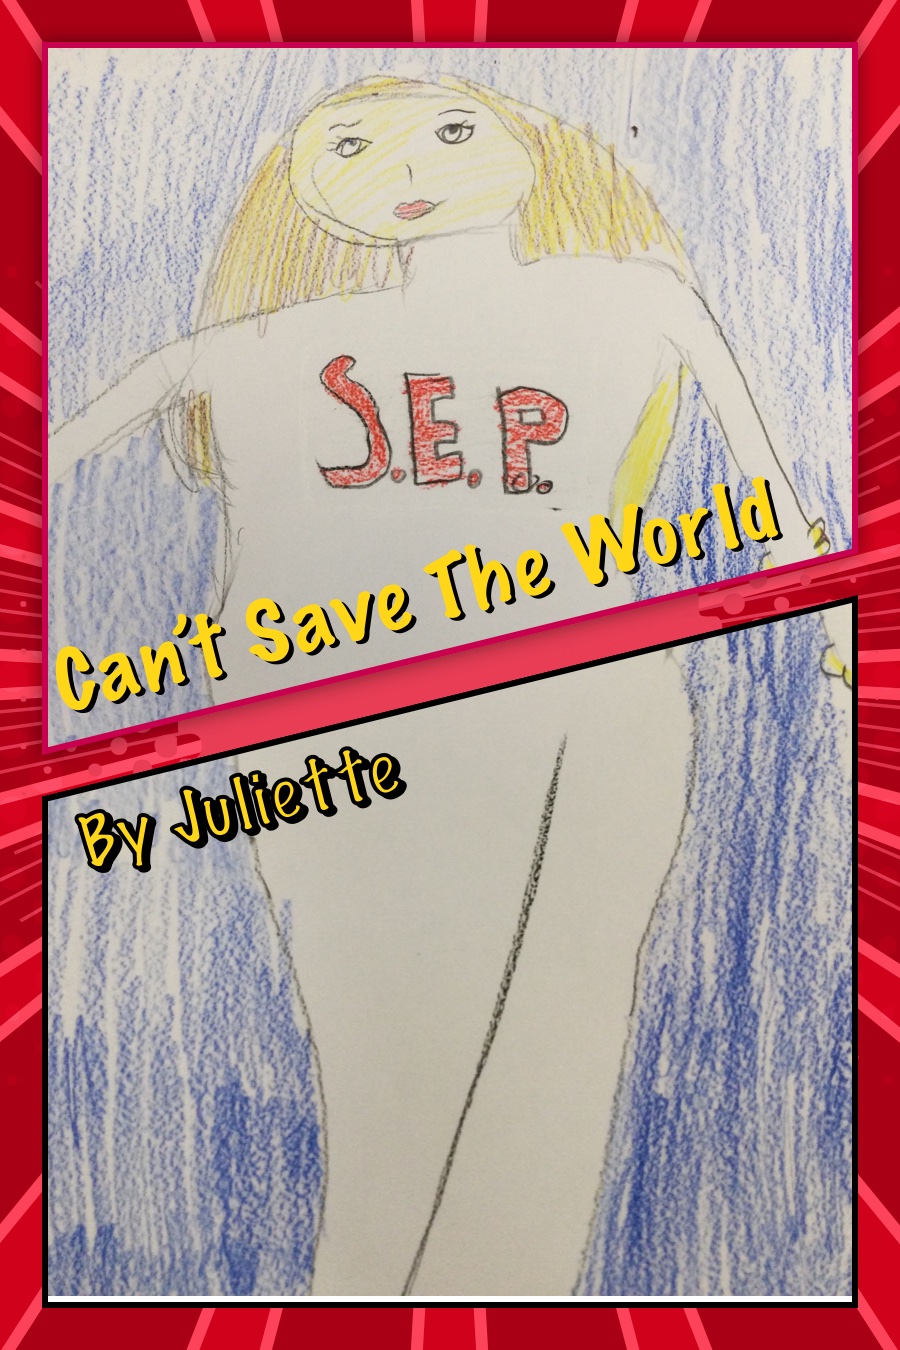 Can’t Save The World by Juliette B